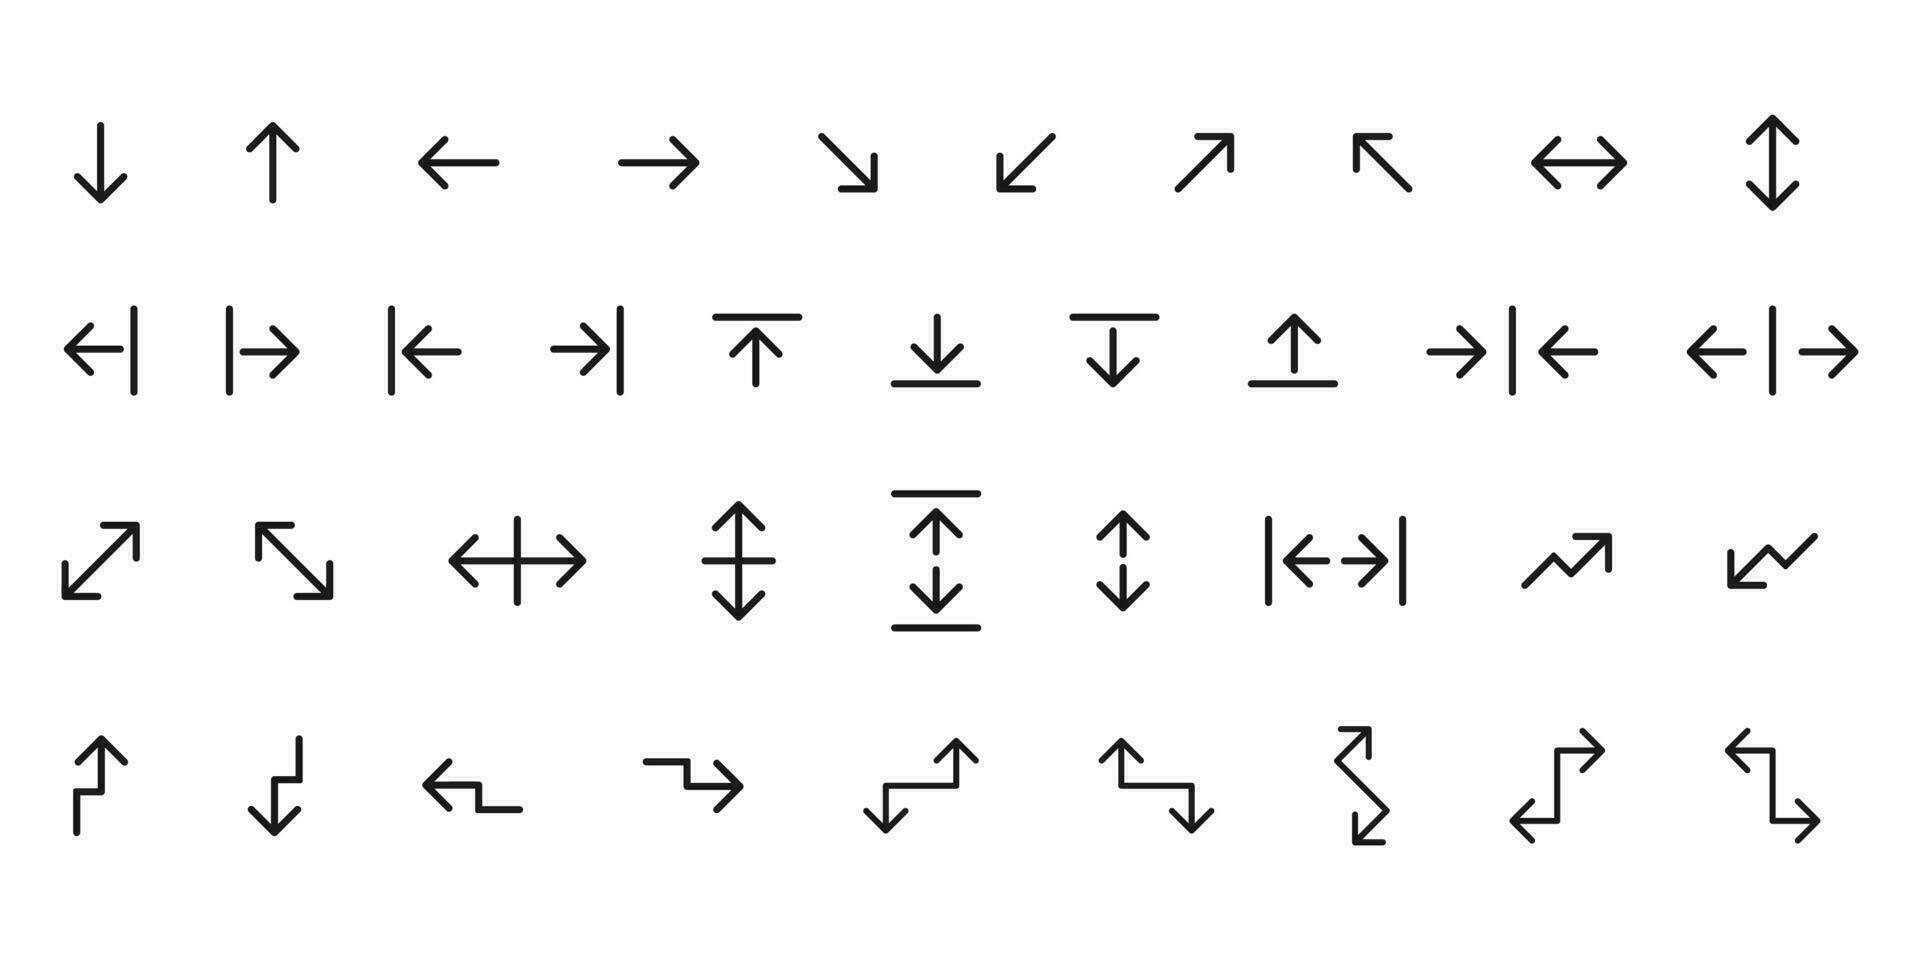 Arrows set. Black navigation cursor icons. Isolated collection of direction arrows. Left and right pointer. Download and upload sign. Simple thin black cursors. Arrow symbol in black. EPS 10. vector